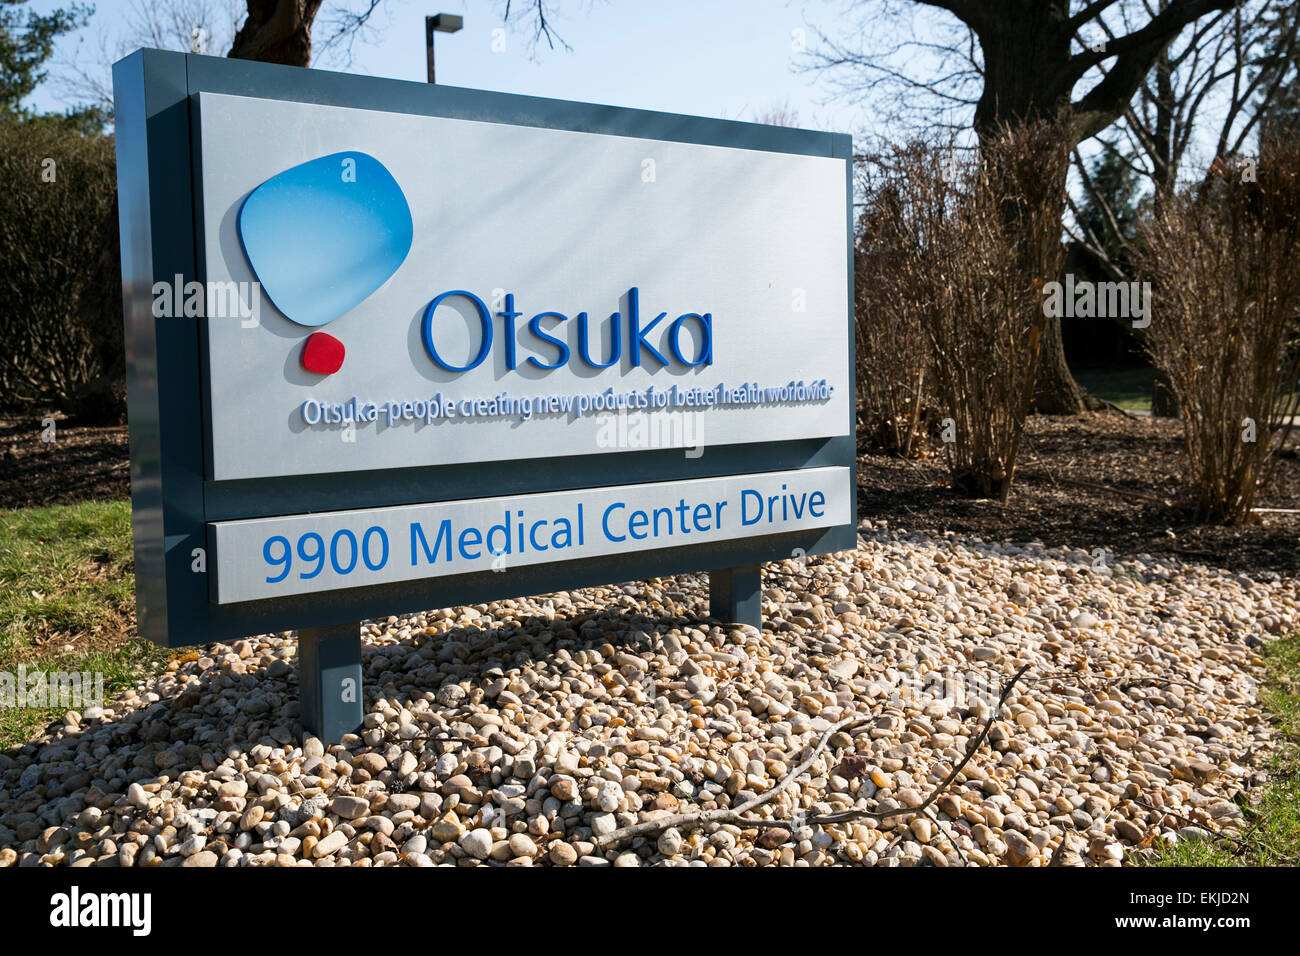 A facility operated by the biotechnology firm Otsuka. Stock Photo